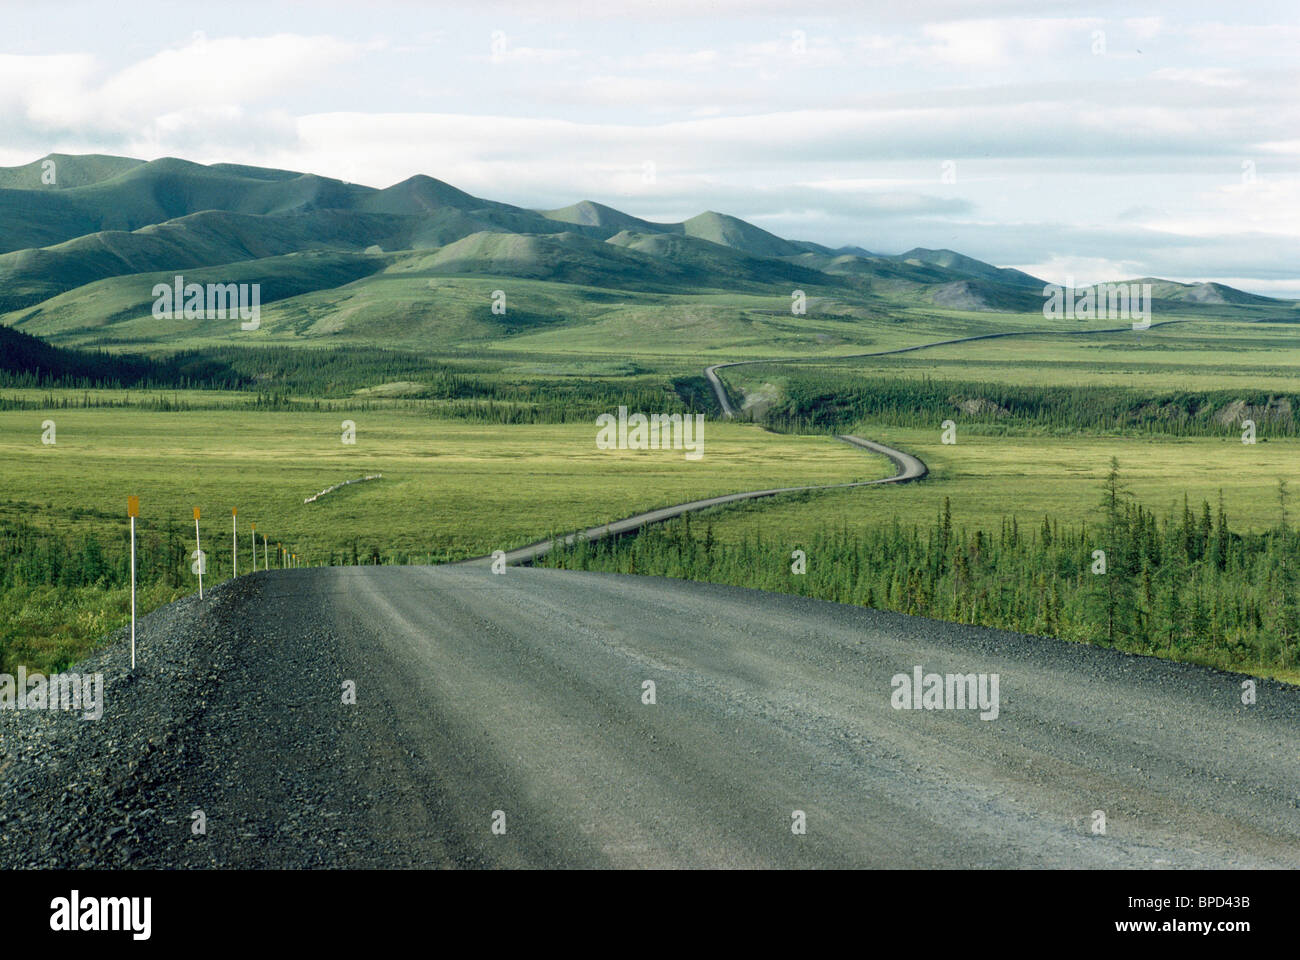 Dempster Highway, Northwest Territories Canada - Long Narrow Winding Gravel Road through Boreal Forest near Richardson Mountains Stock Photo